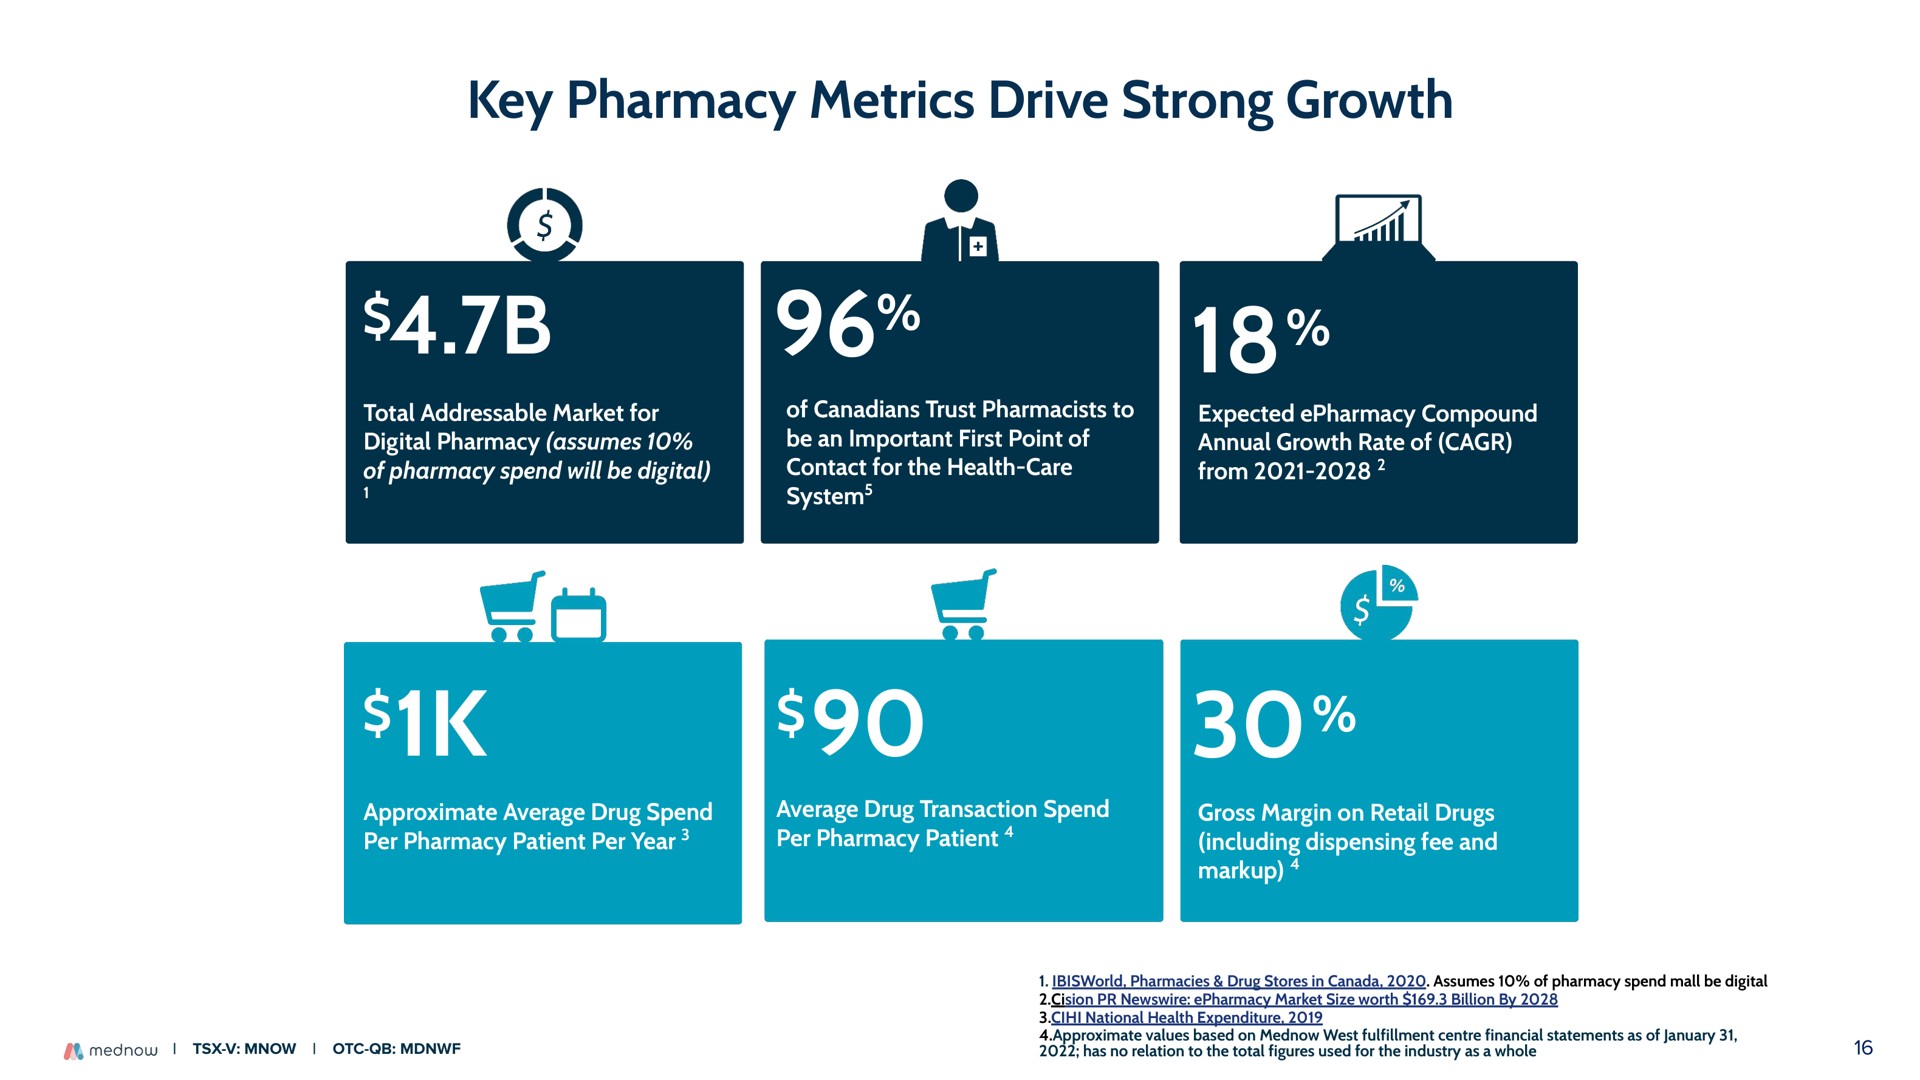 key pharmacy metrics drive strong growth total market for digital pharmacy assumes of pharmacy spend will be digital of trust pharmacists to be an important first point of contact for the health care system expected compound annual growth rate of from approximate average drug spend per pharmacy patient per year average drug transaction spend per pharmacy patient gross margin on retail drugs including dispensing fee and markup as a | Mednow